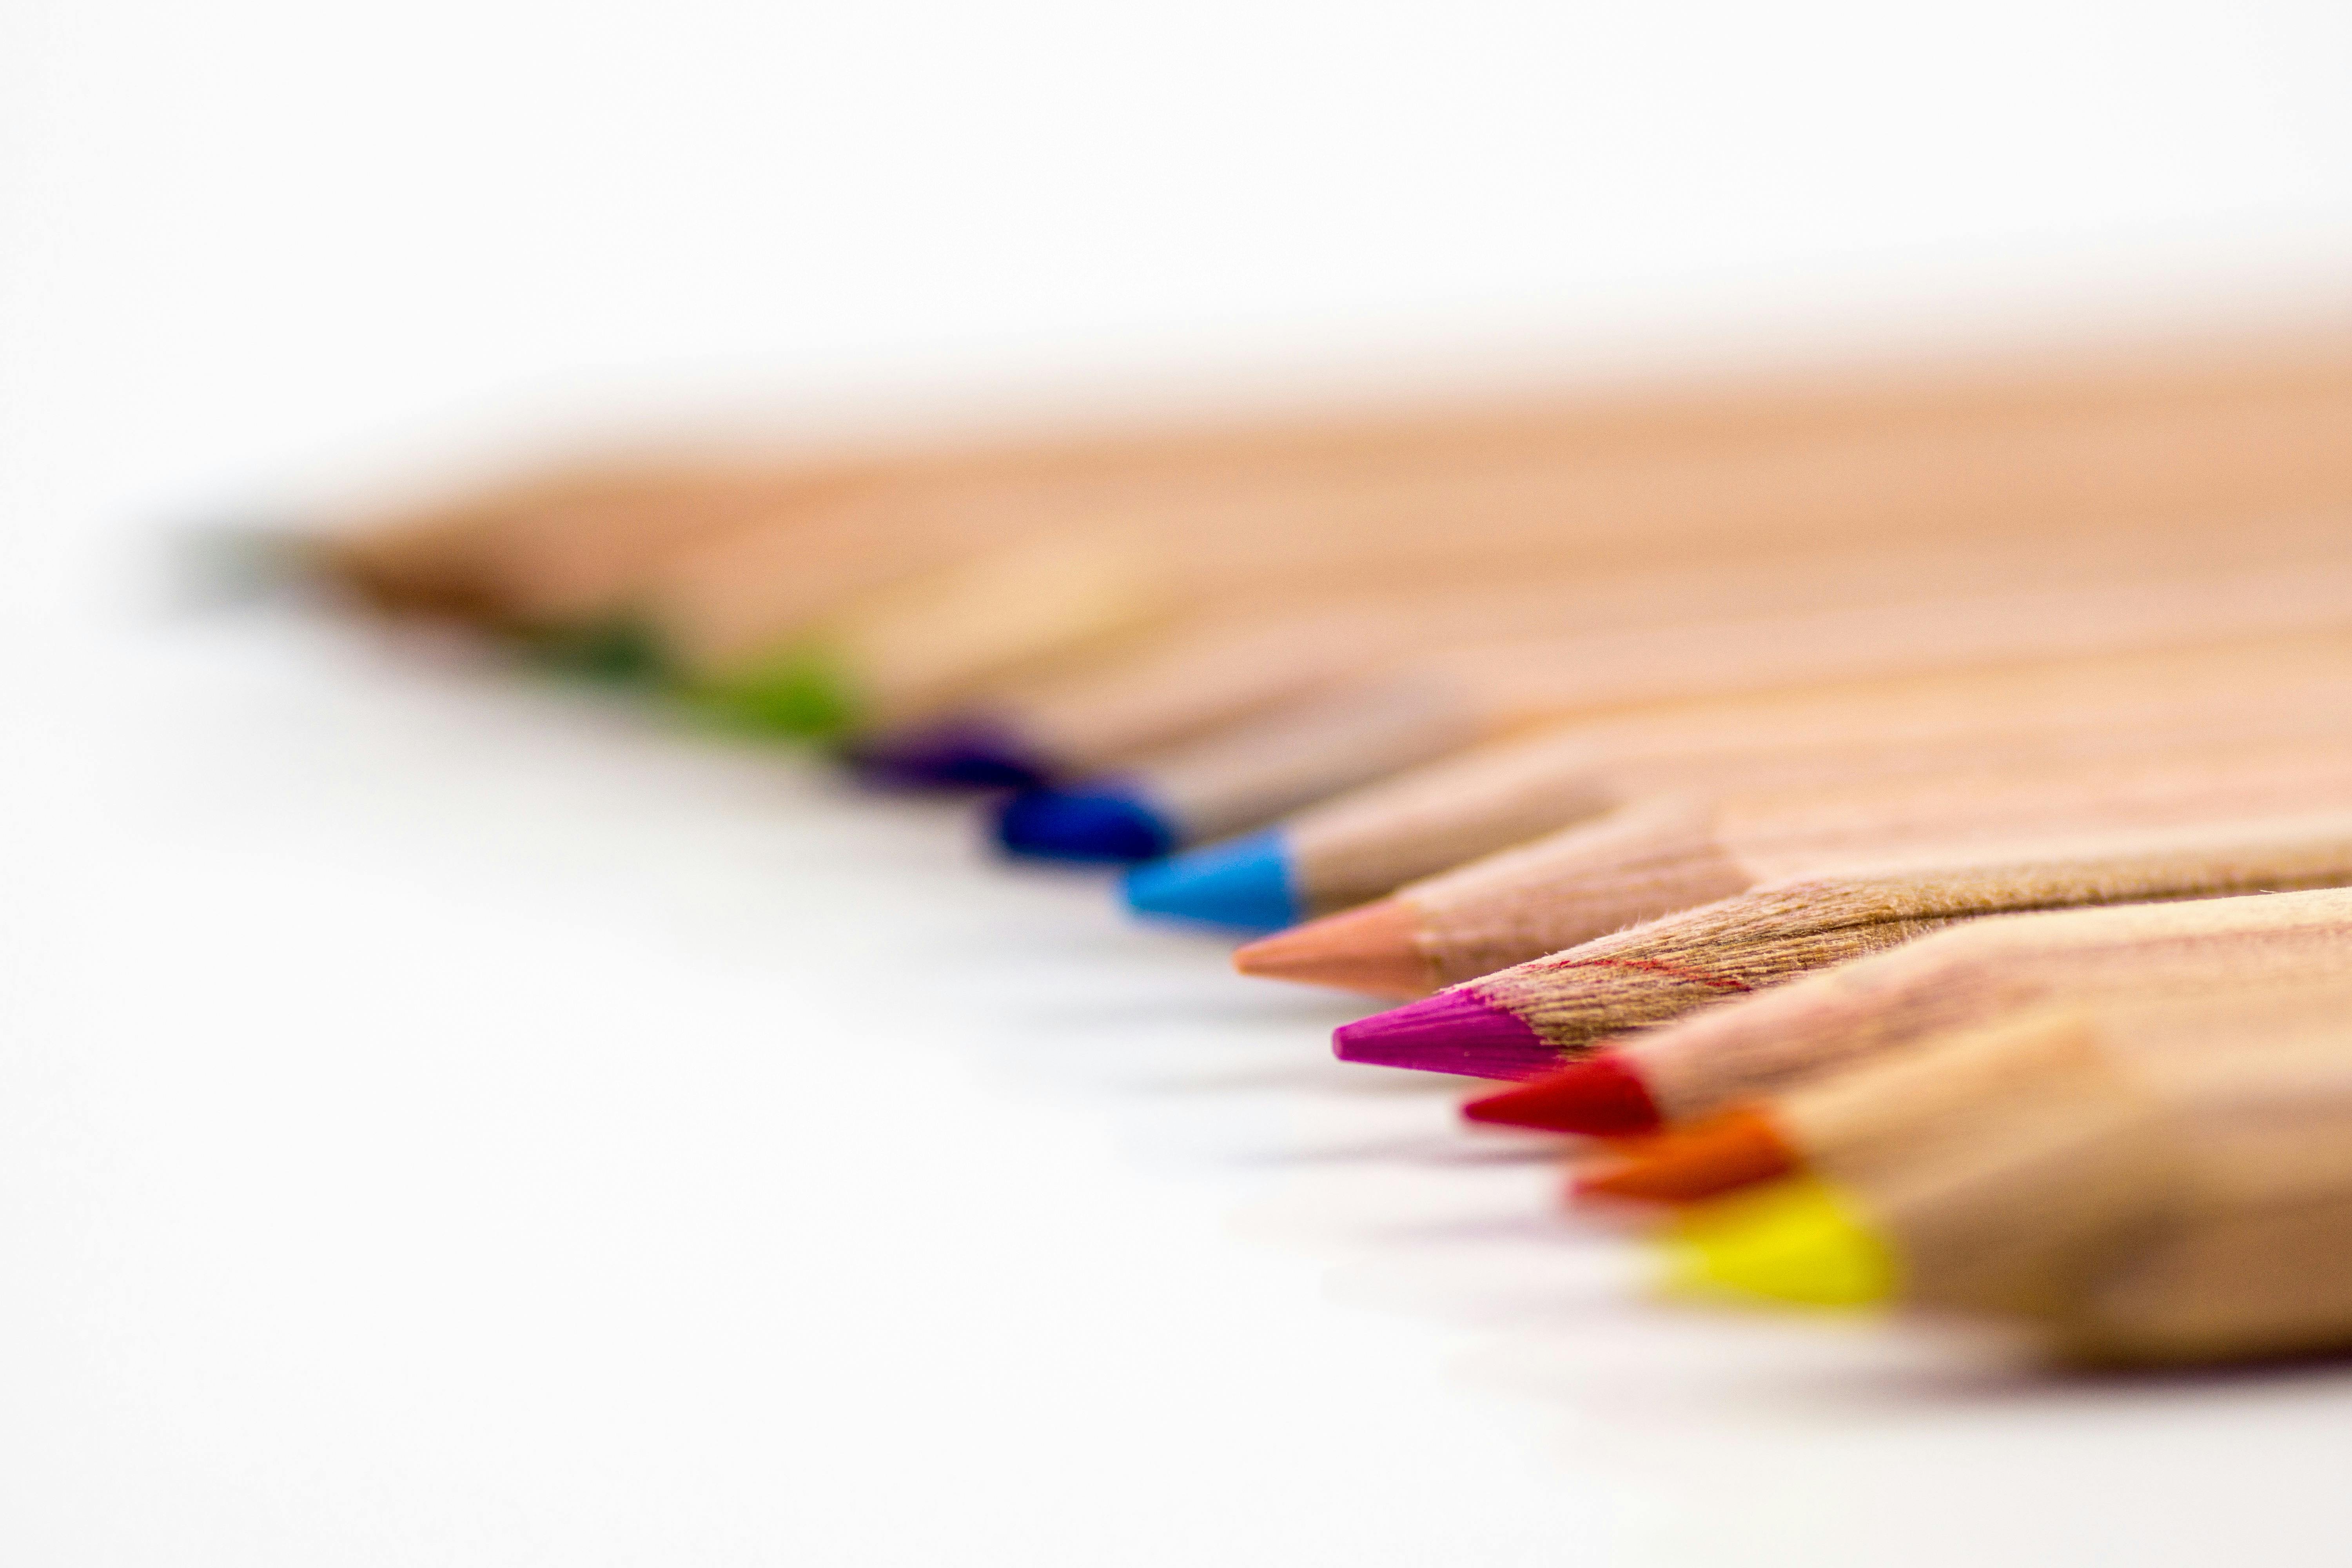 Generic Coloring Crayons Stock Photo, Picture and Royalty Free